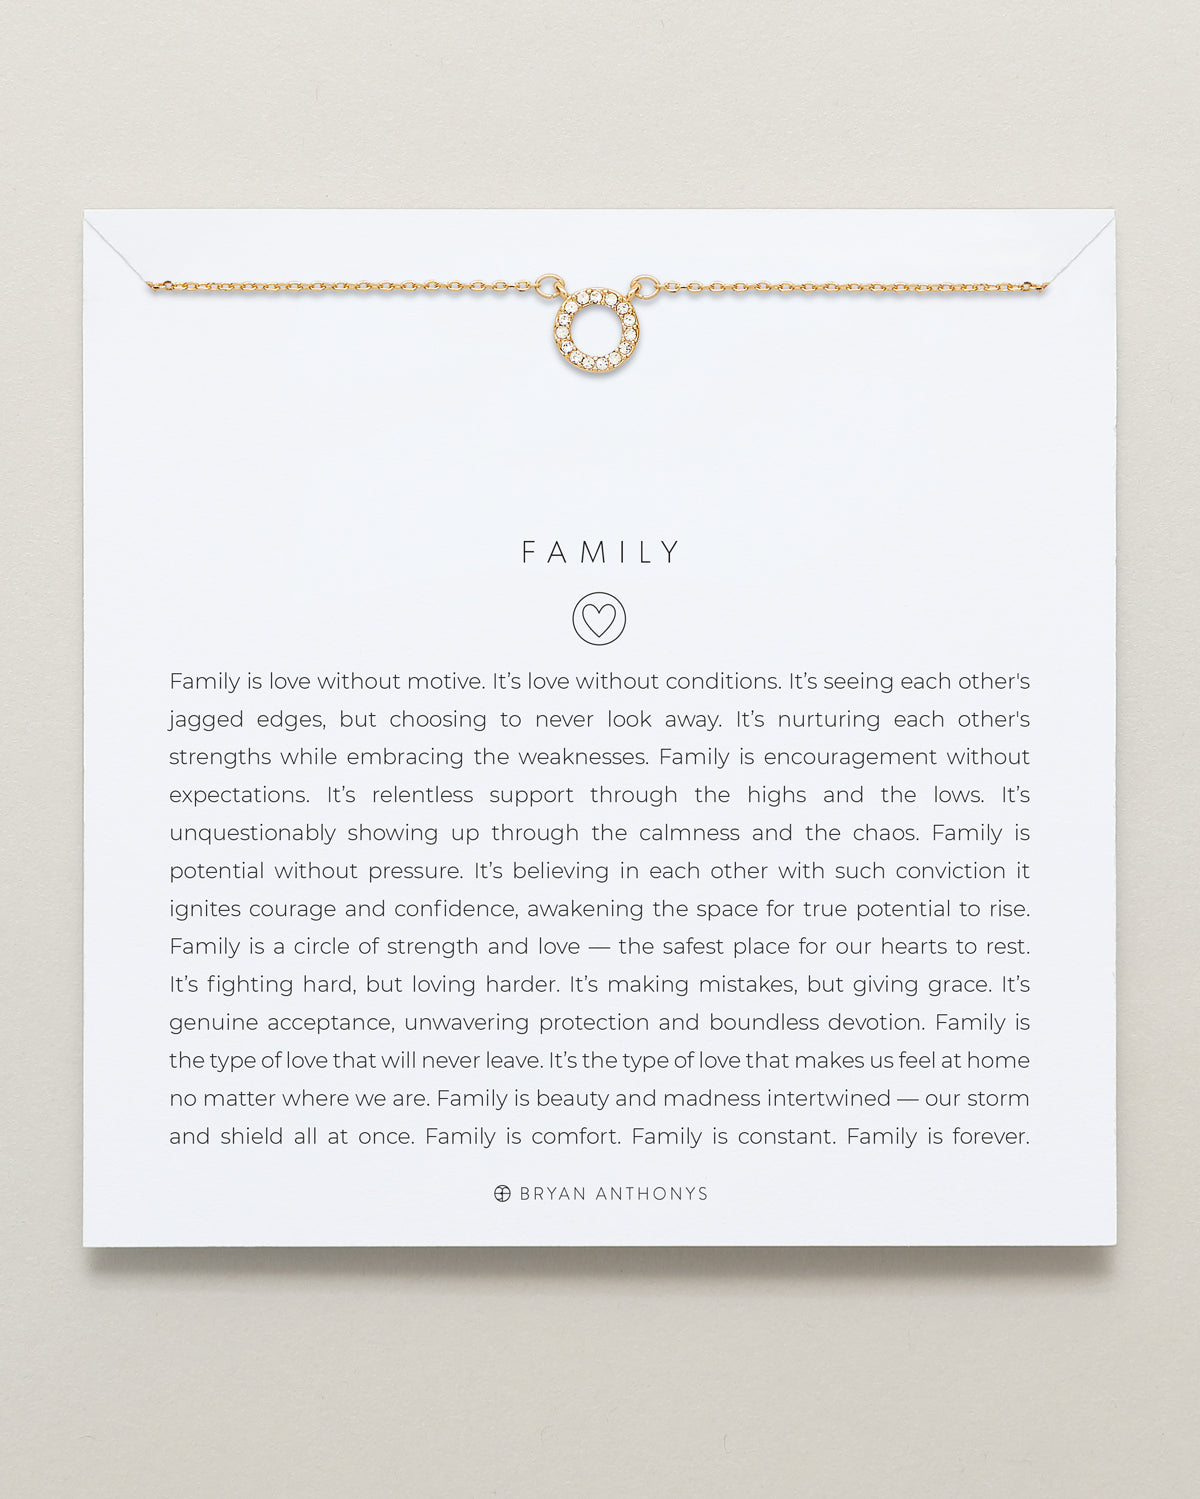 Bryan Anthonys Family Gold Necklace On Card